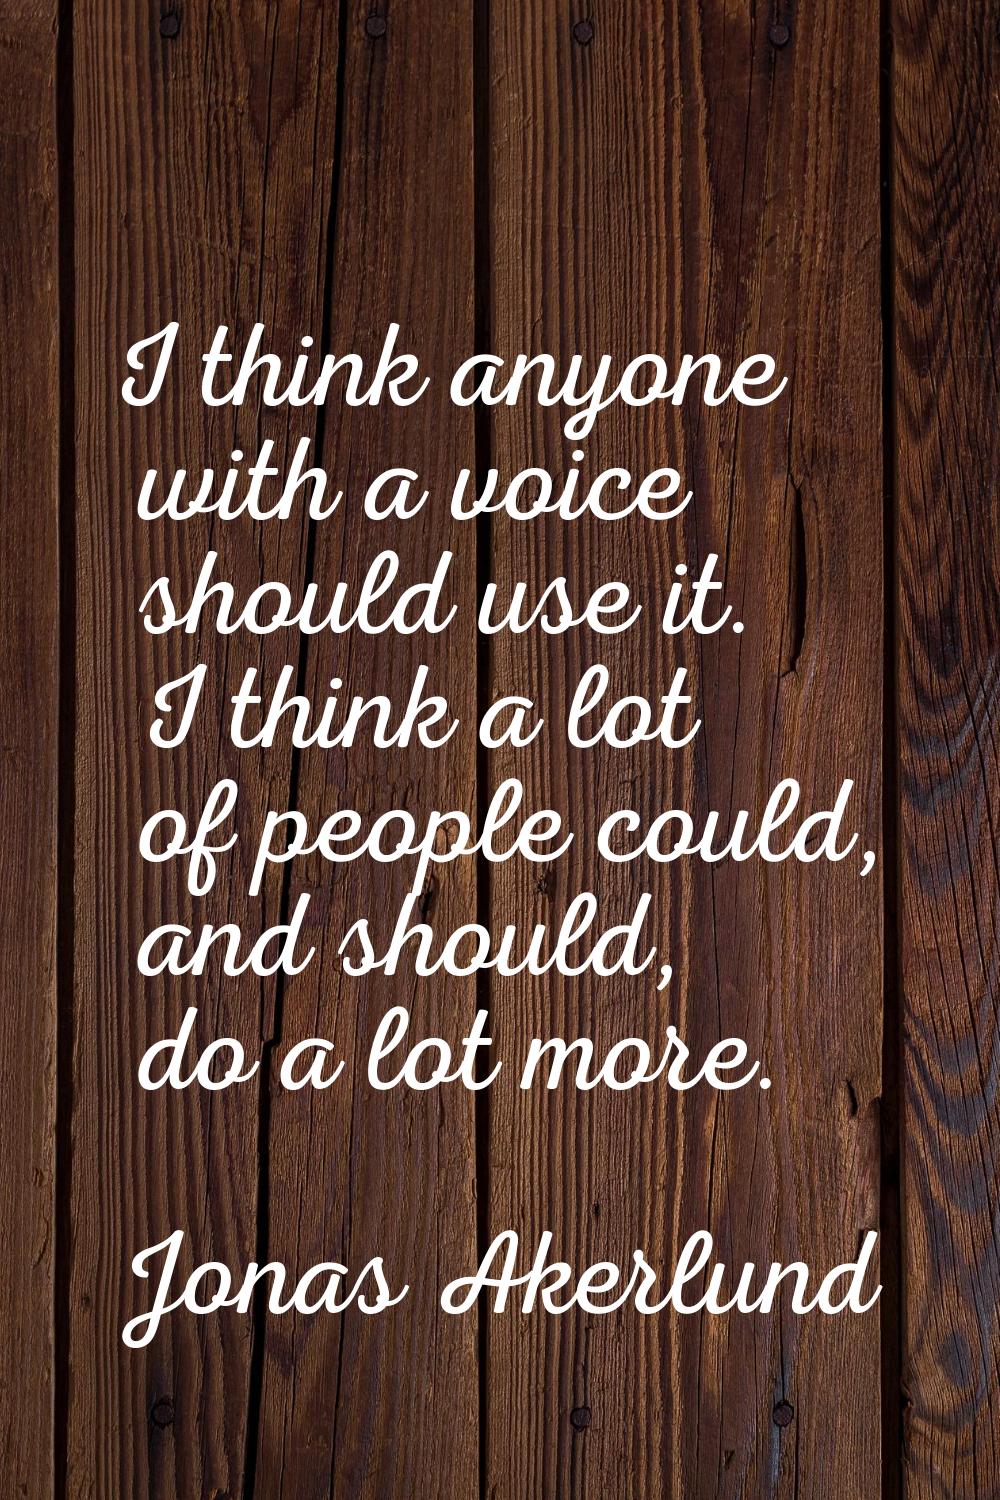 I think anyone with a voice should use it. I think a lot of people could, and should, do a lot more